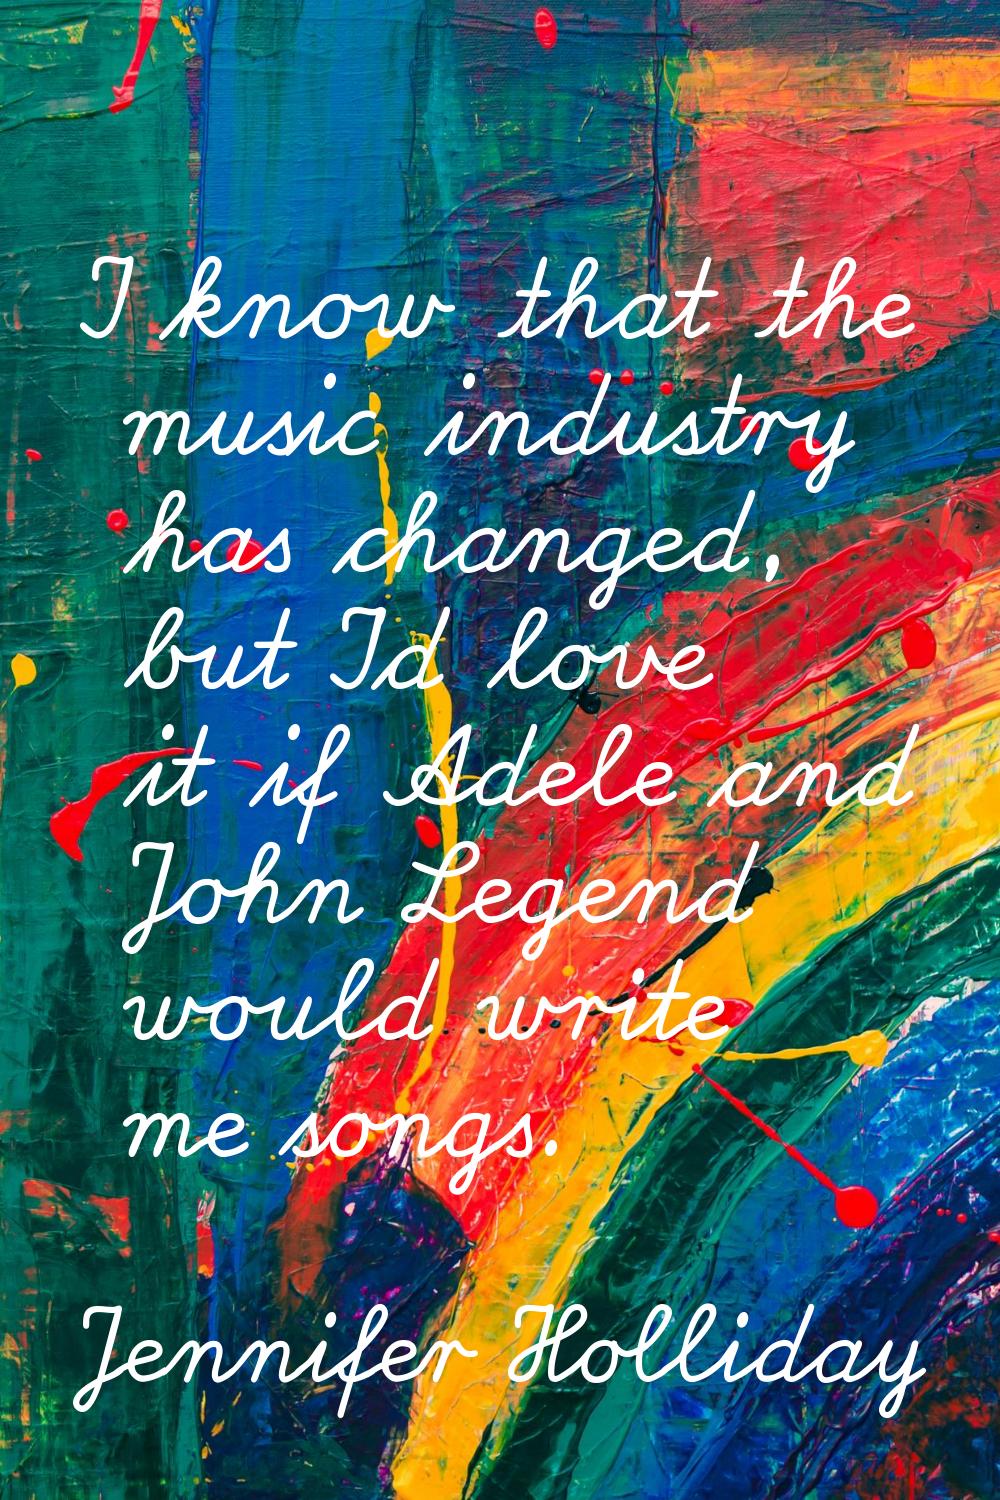 I know that the music industry has changed, but I'd love it if Adele and John Legend would write me